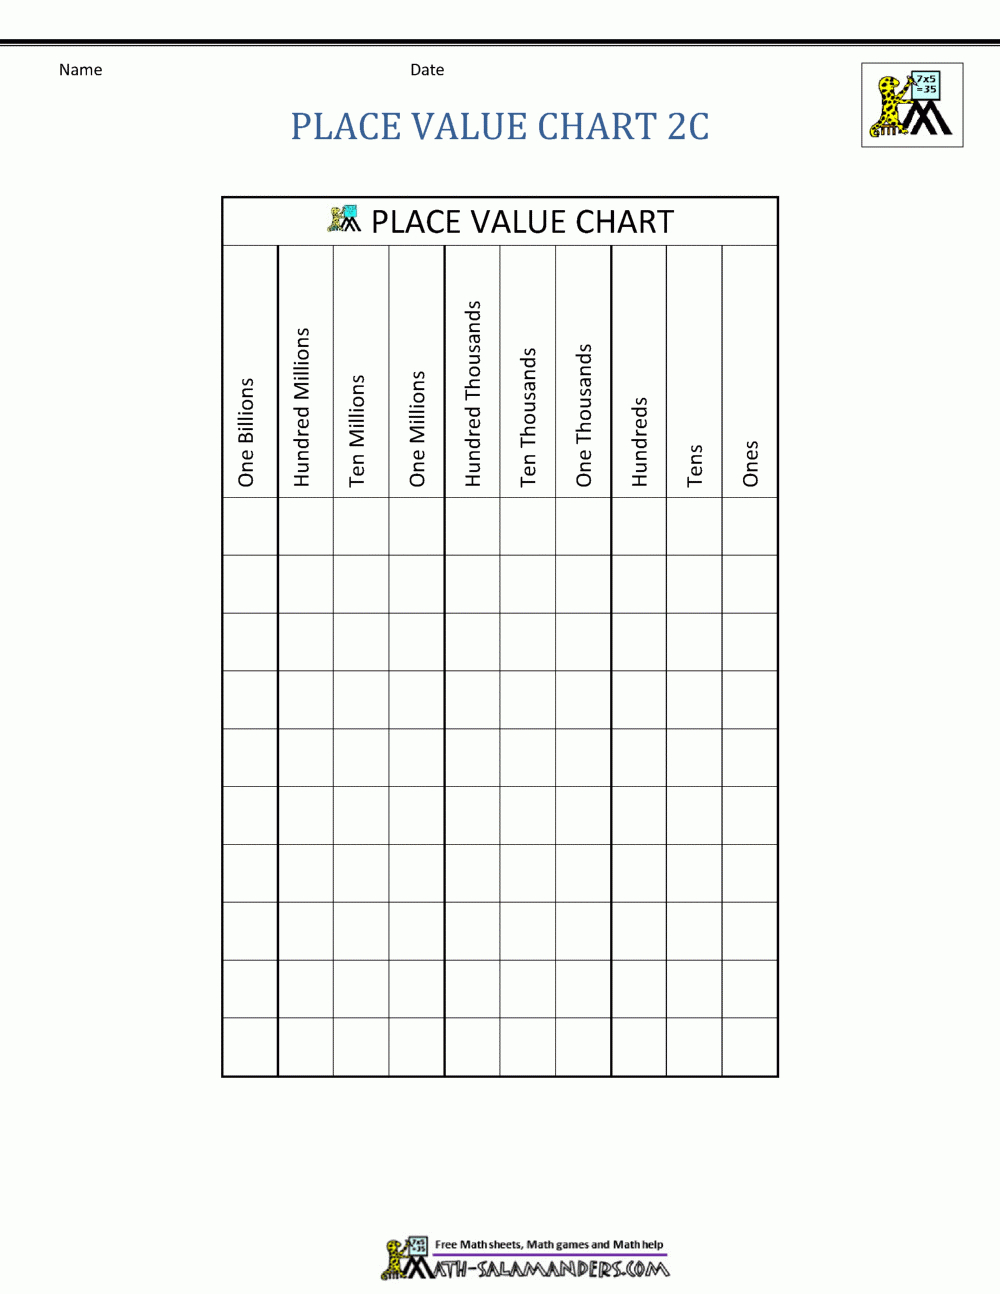 Place Value Charts - Free Printable Place Value Chart In Spanish